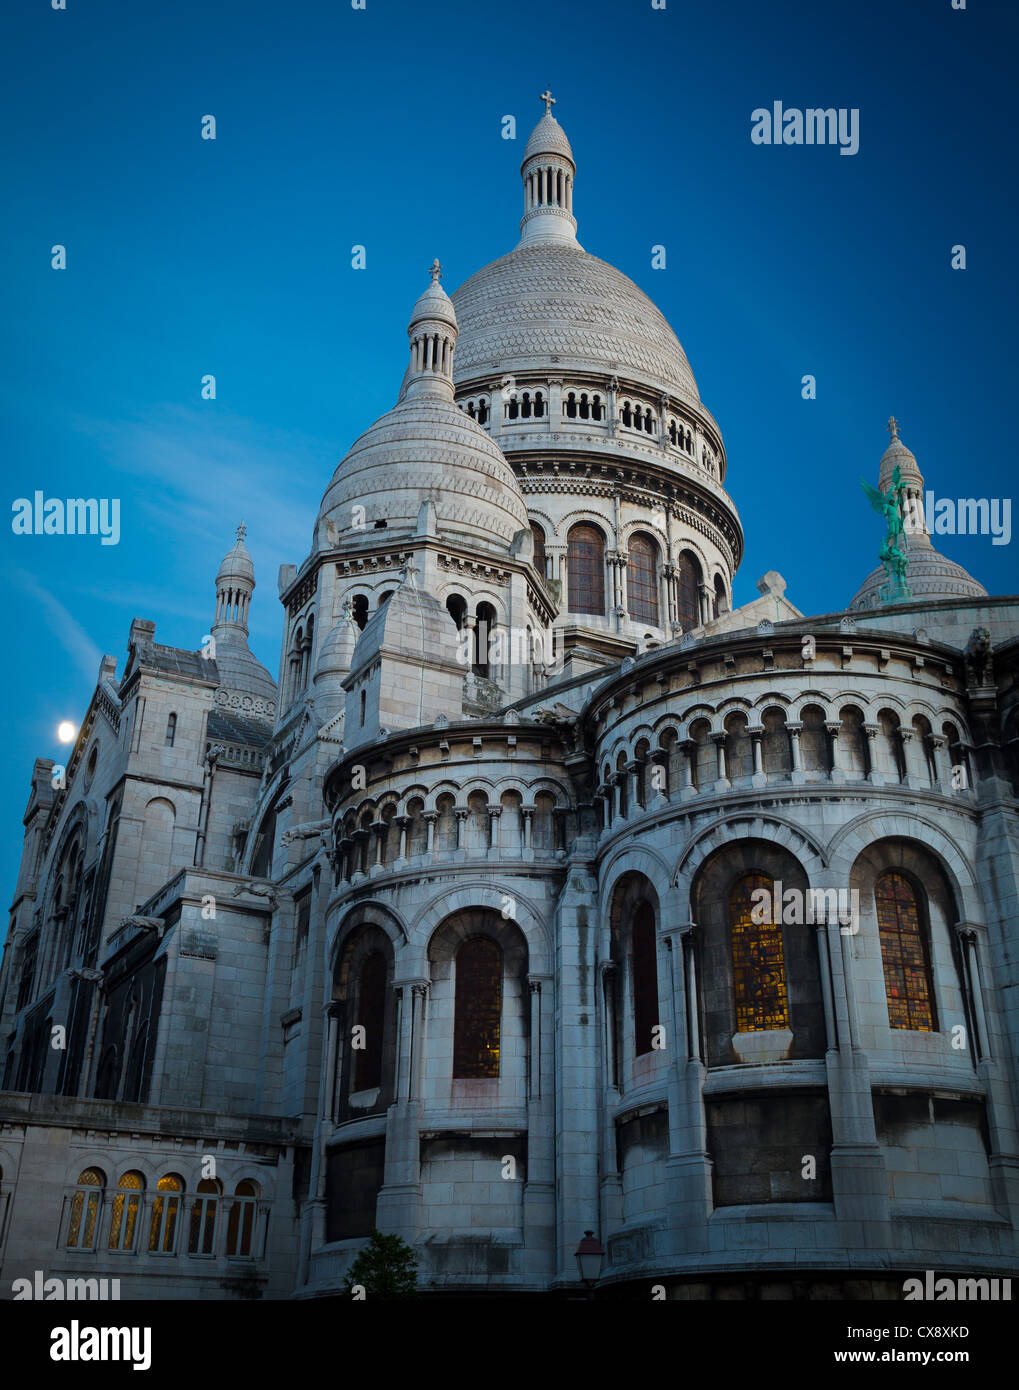 The Basilica of the Sacred Heart of Paris, commonly known as Sacré-Cœur Basilica, in Paris, France Stock Photo